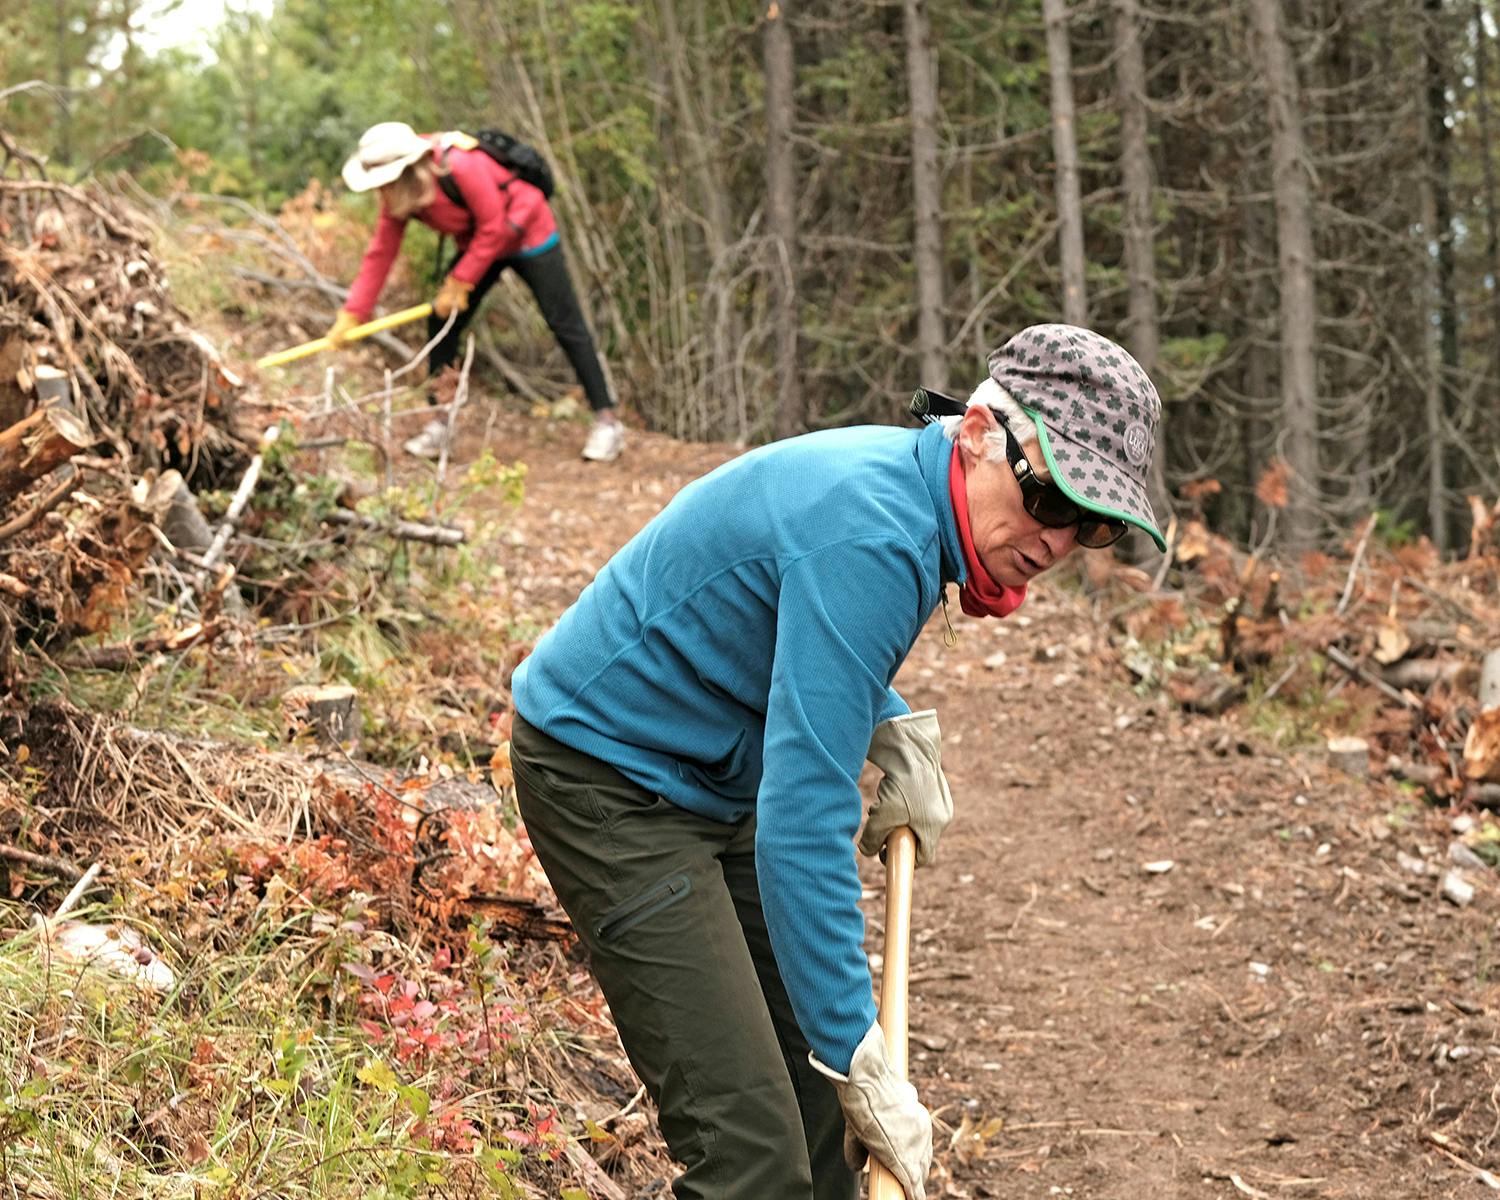 Volunteers working on trail midway_by Geoff Sutton_courtesy of Five Valleys.jpg